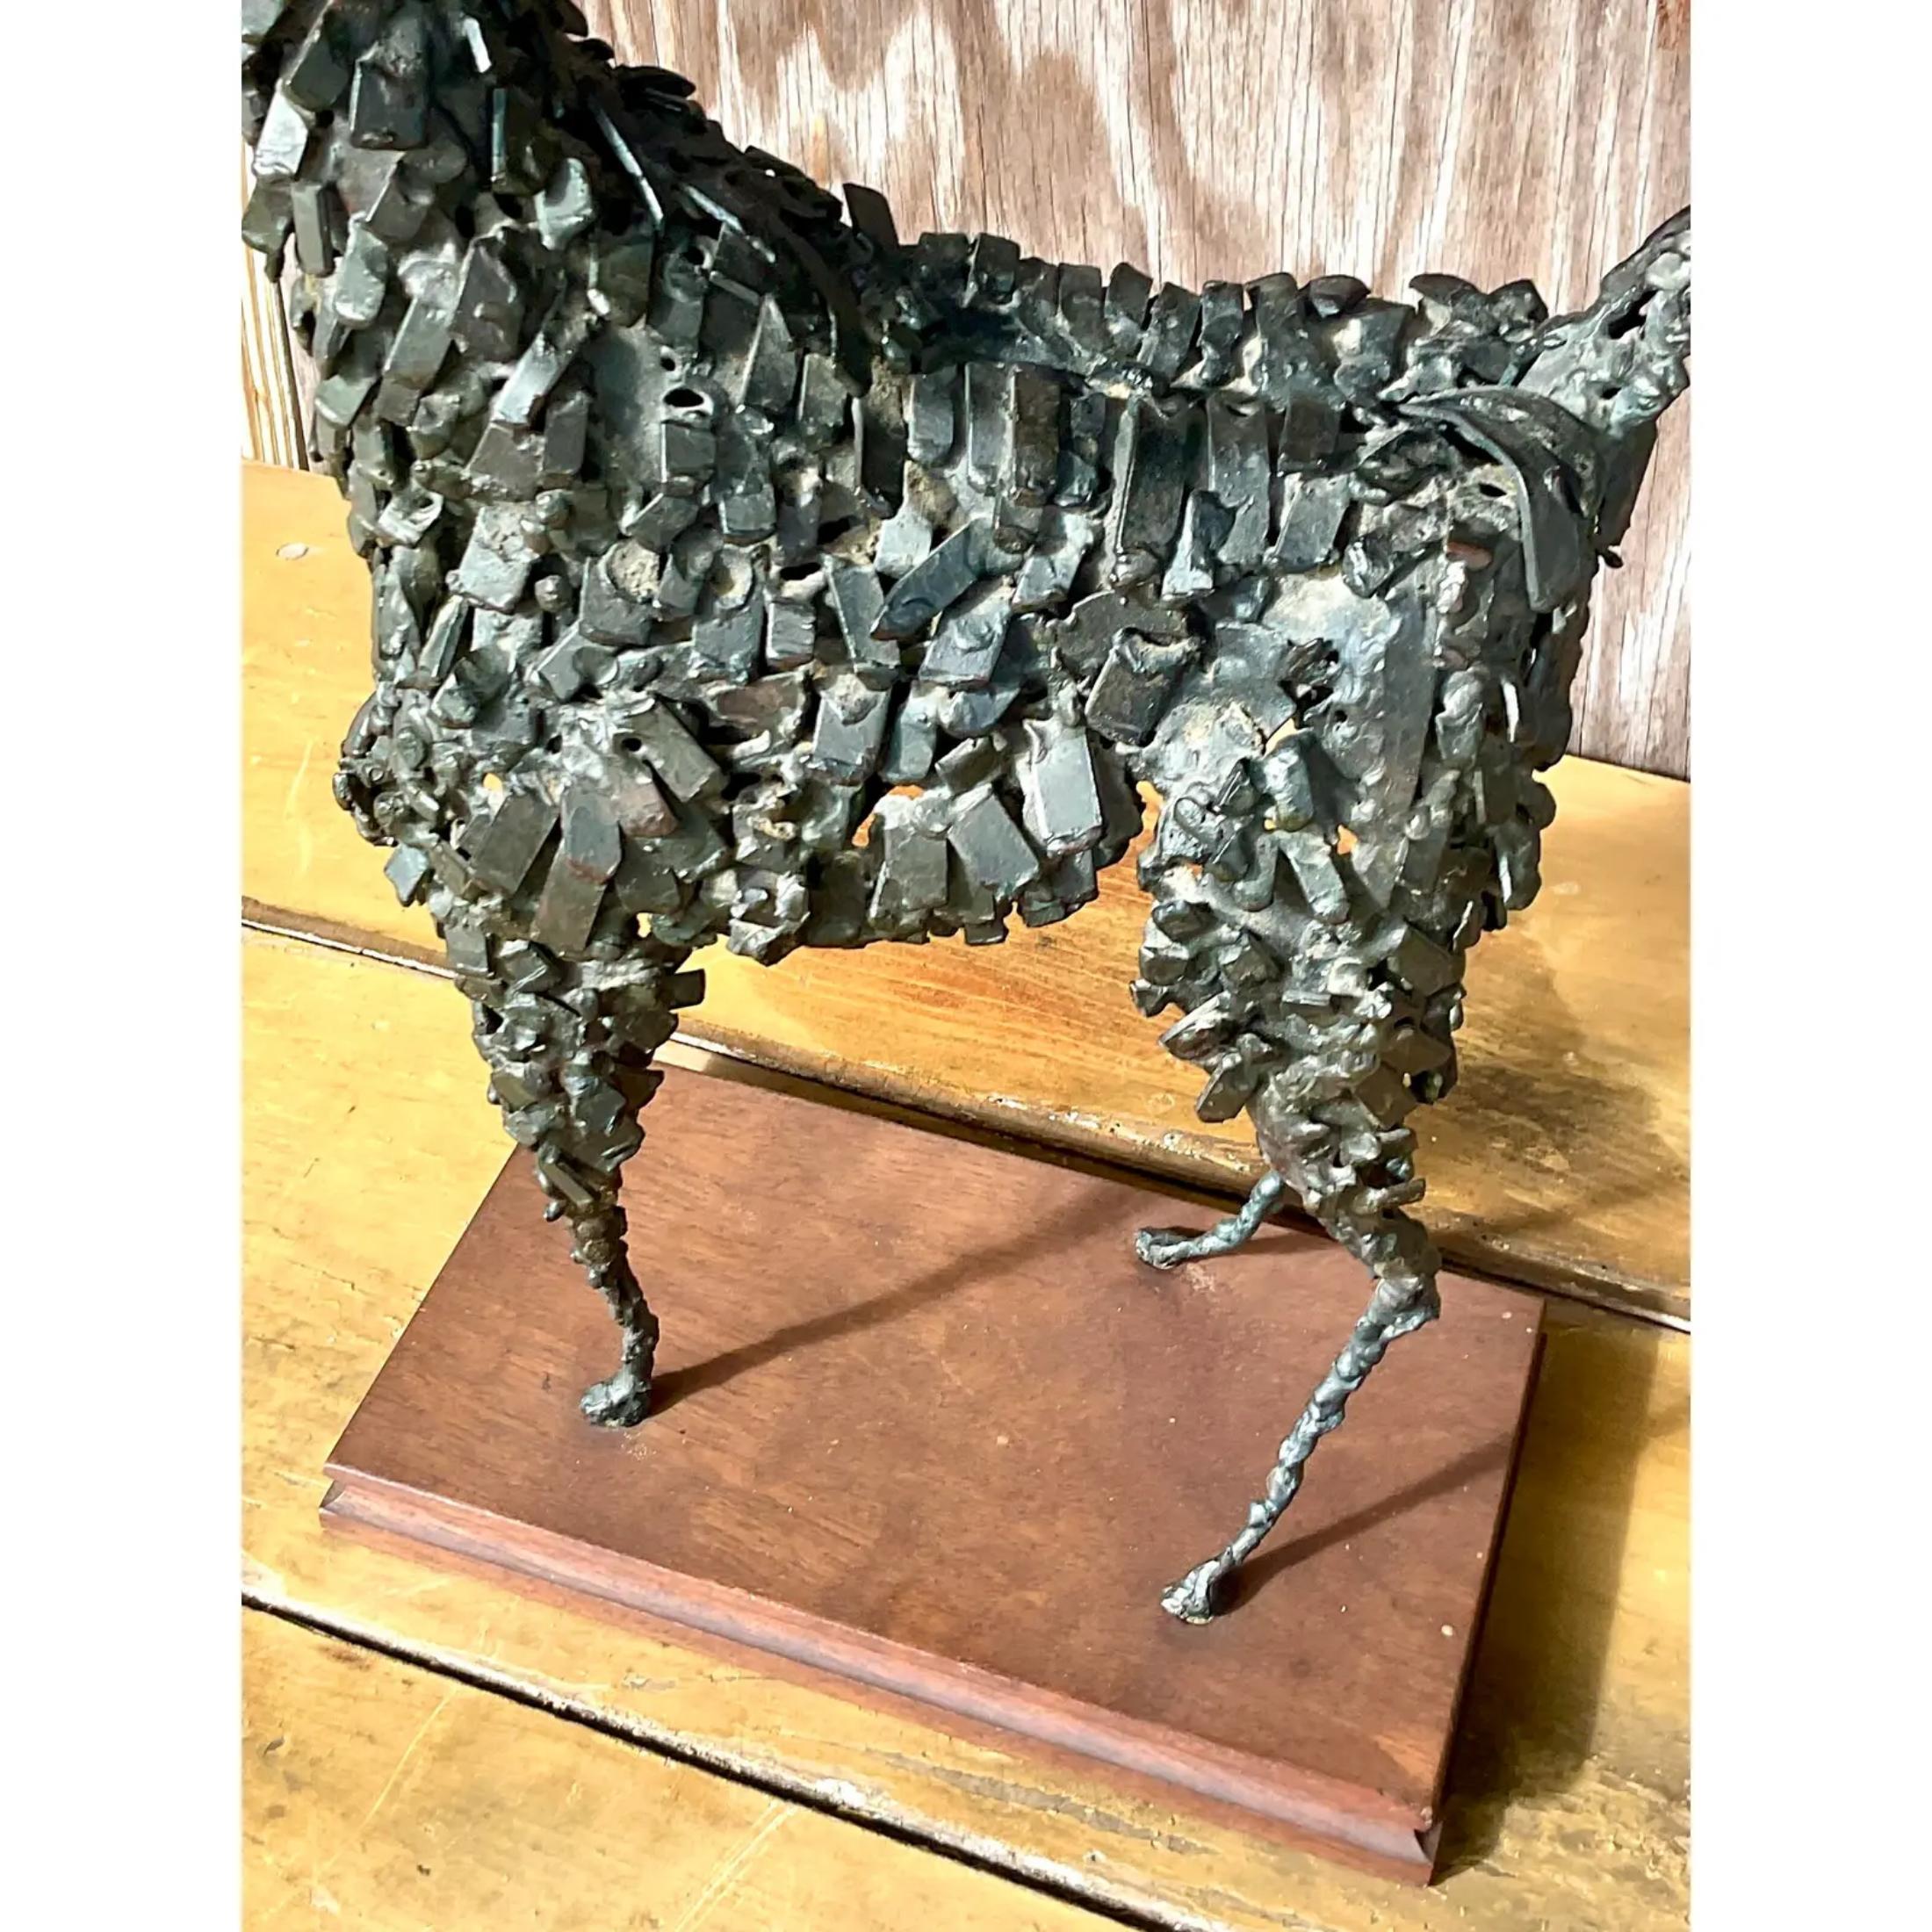 Fantastic tall Midcentury llama sculpture. Beautiful metal construction in a chic slender design. Signed The Gould Collection on the bottom. Acquired from a Plm Beach estate